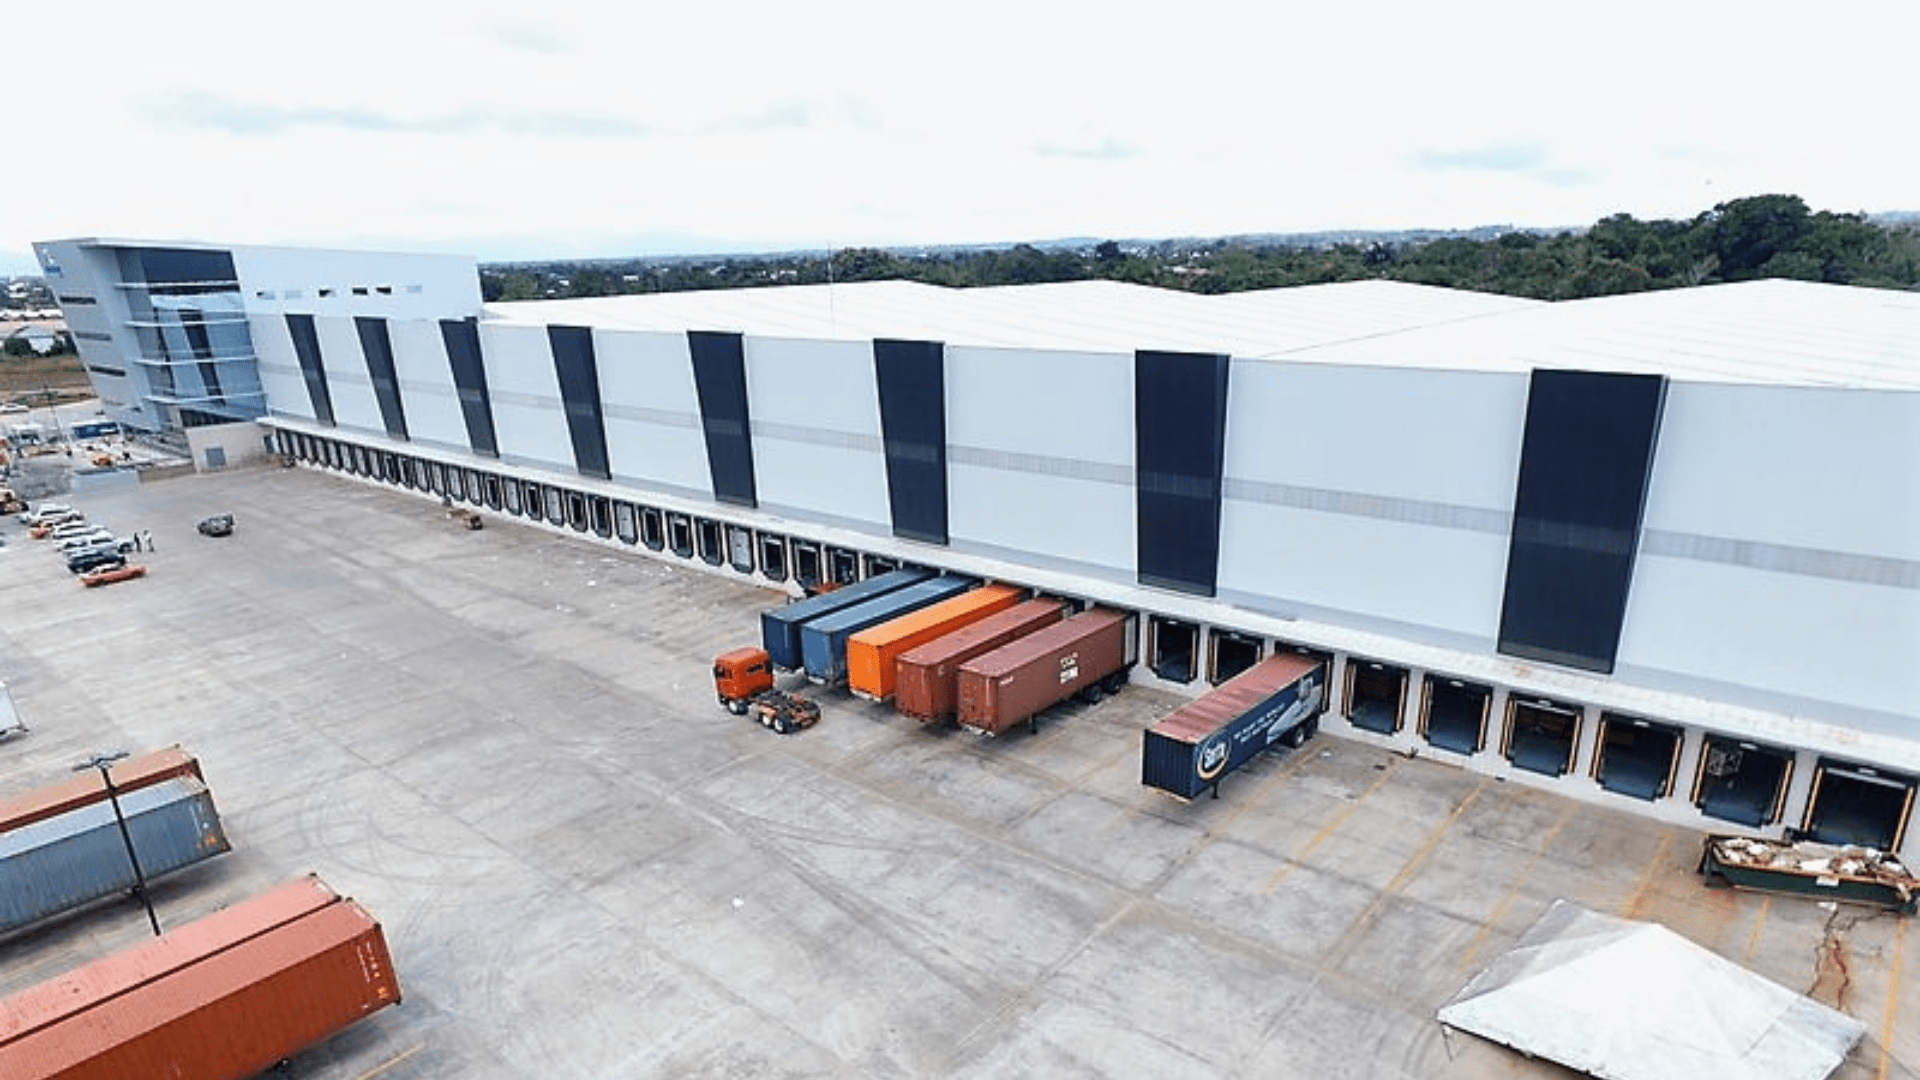 unicomer distribution center lateral view in trinidad